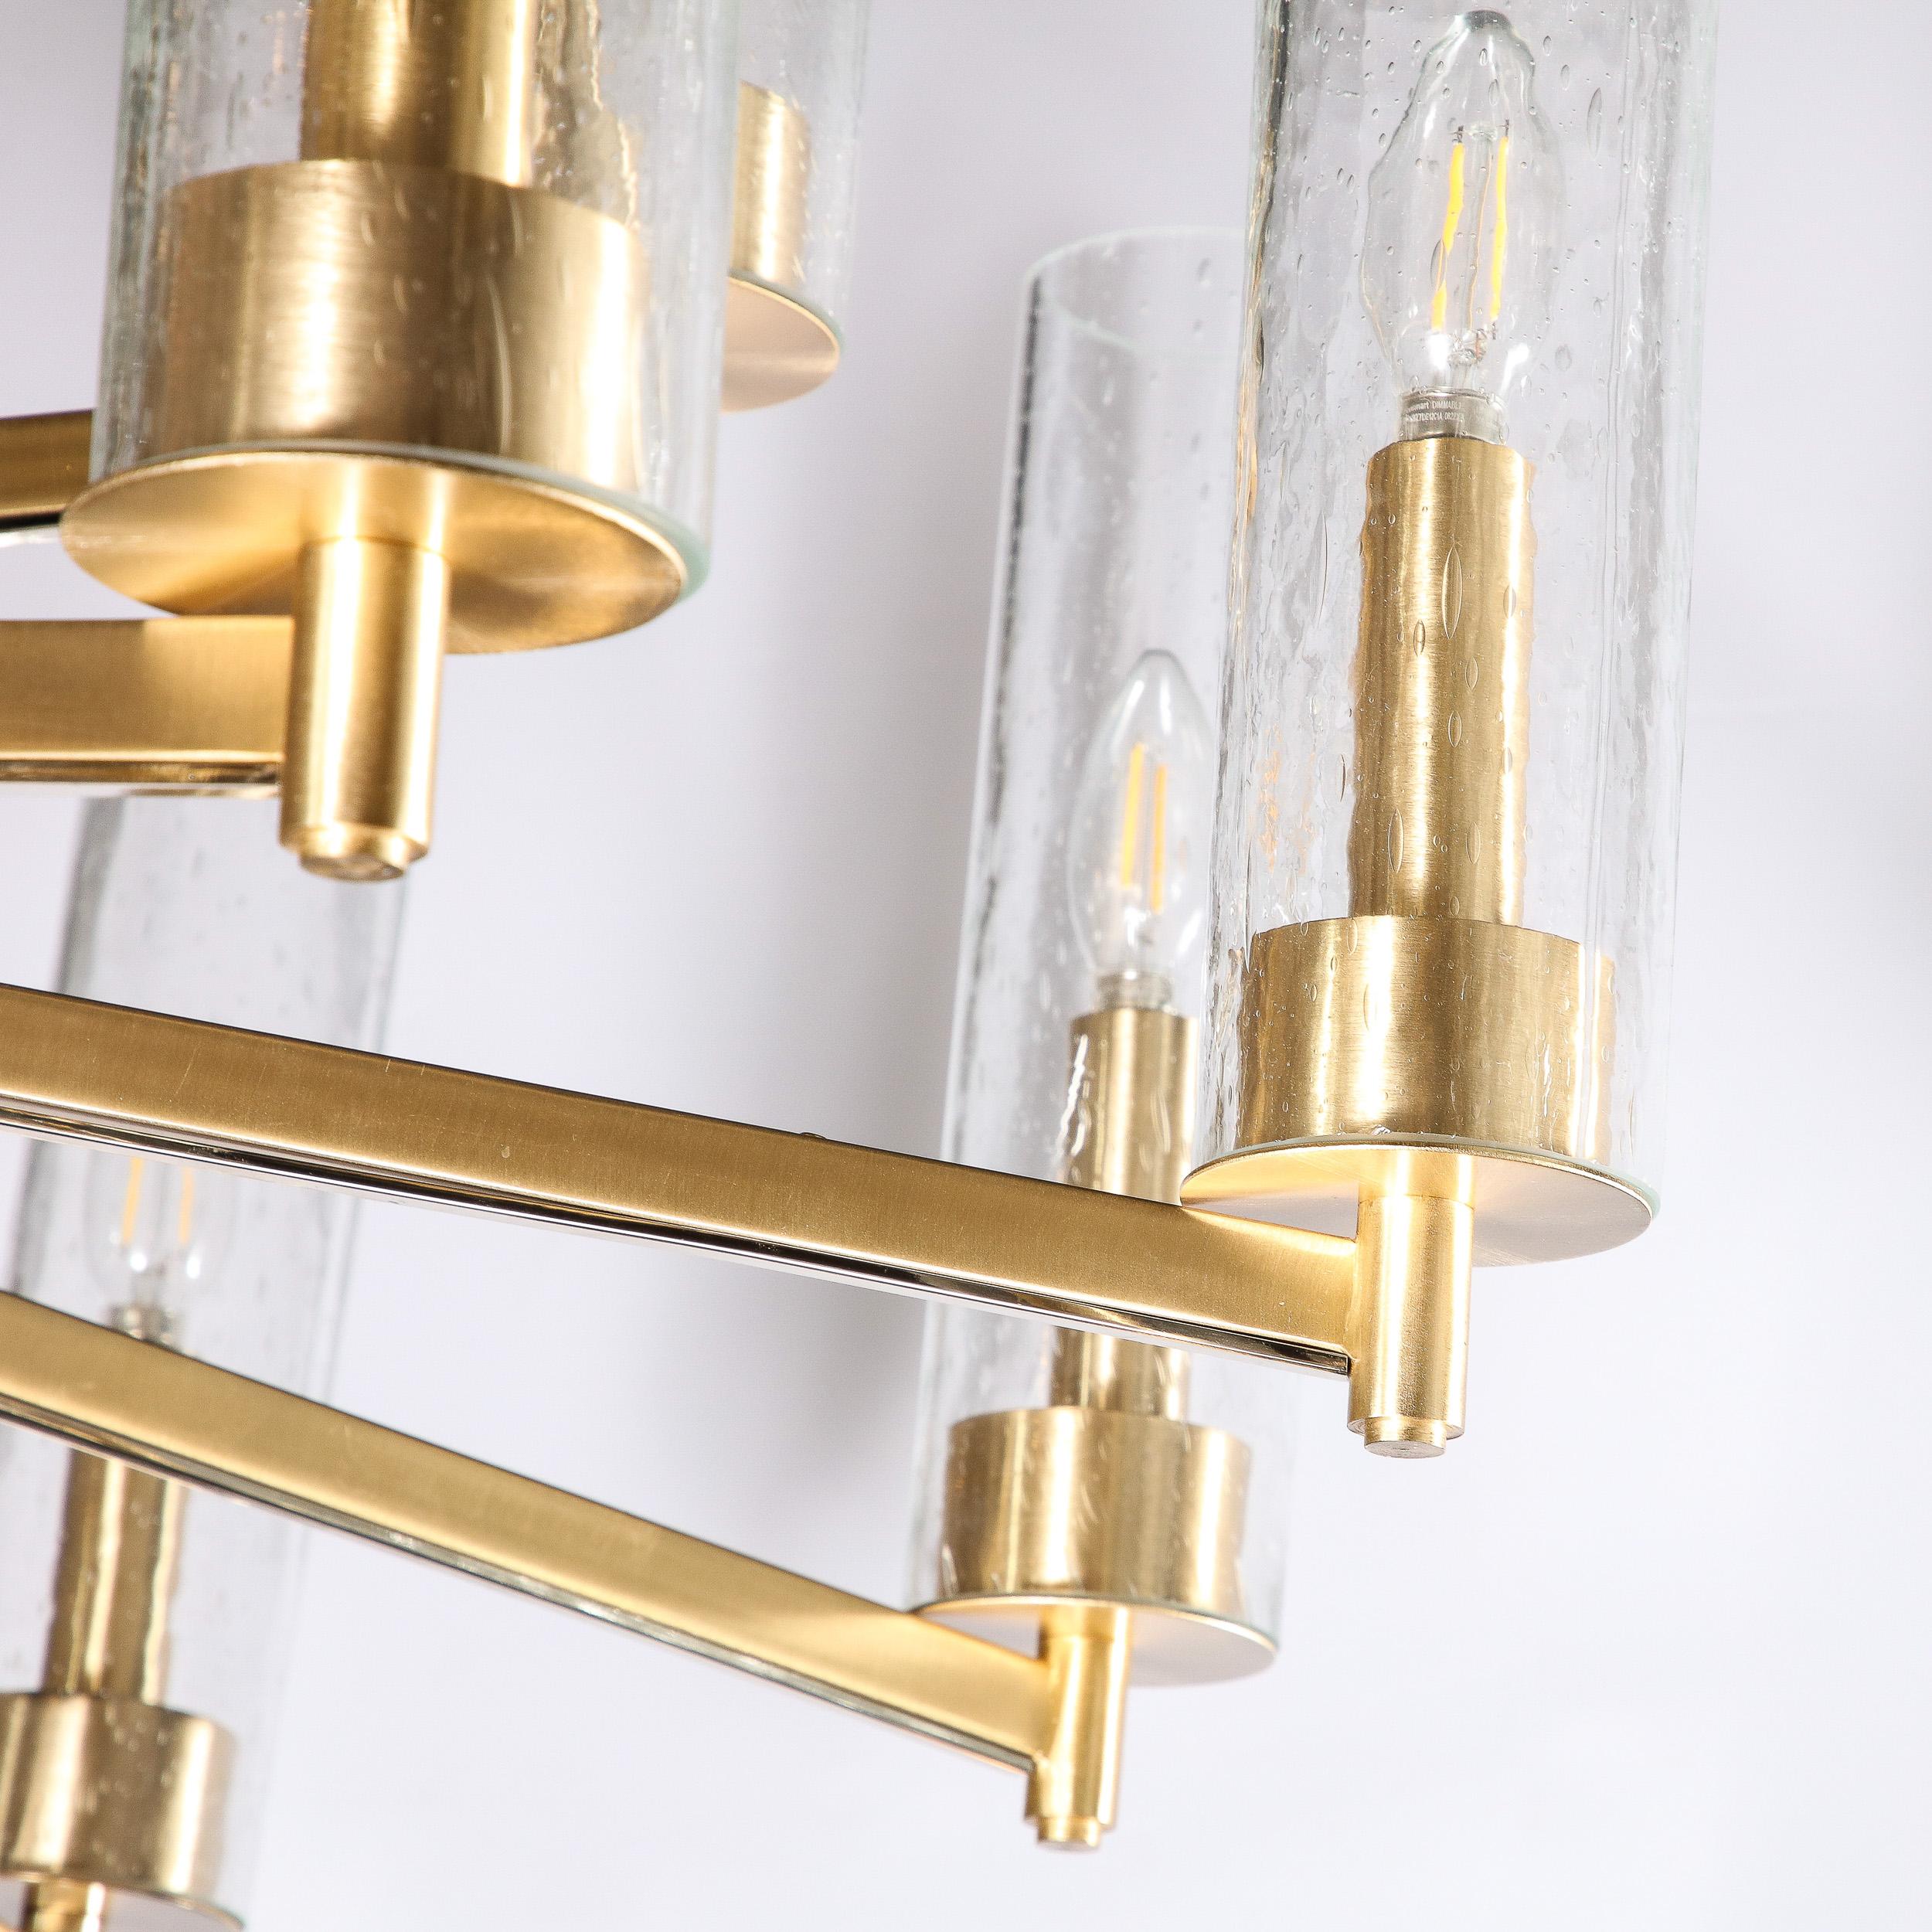 Modernist 15 Arm Chandelier in Brushed Brass & Transparent Cylindrical Shades For Sale 1